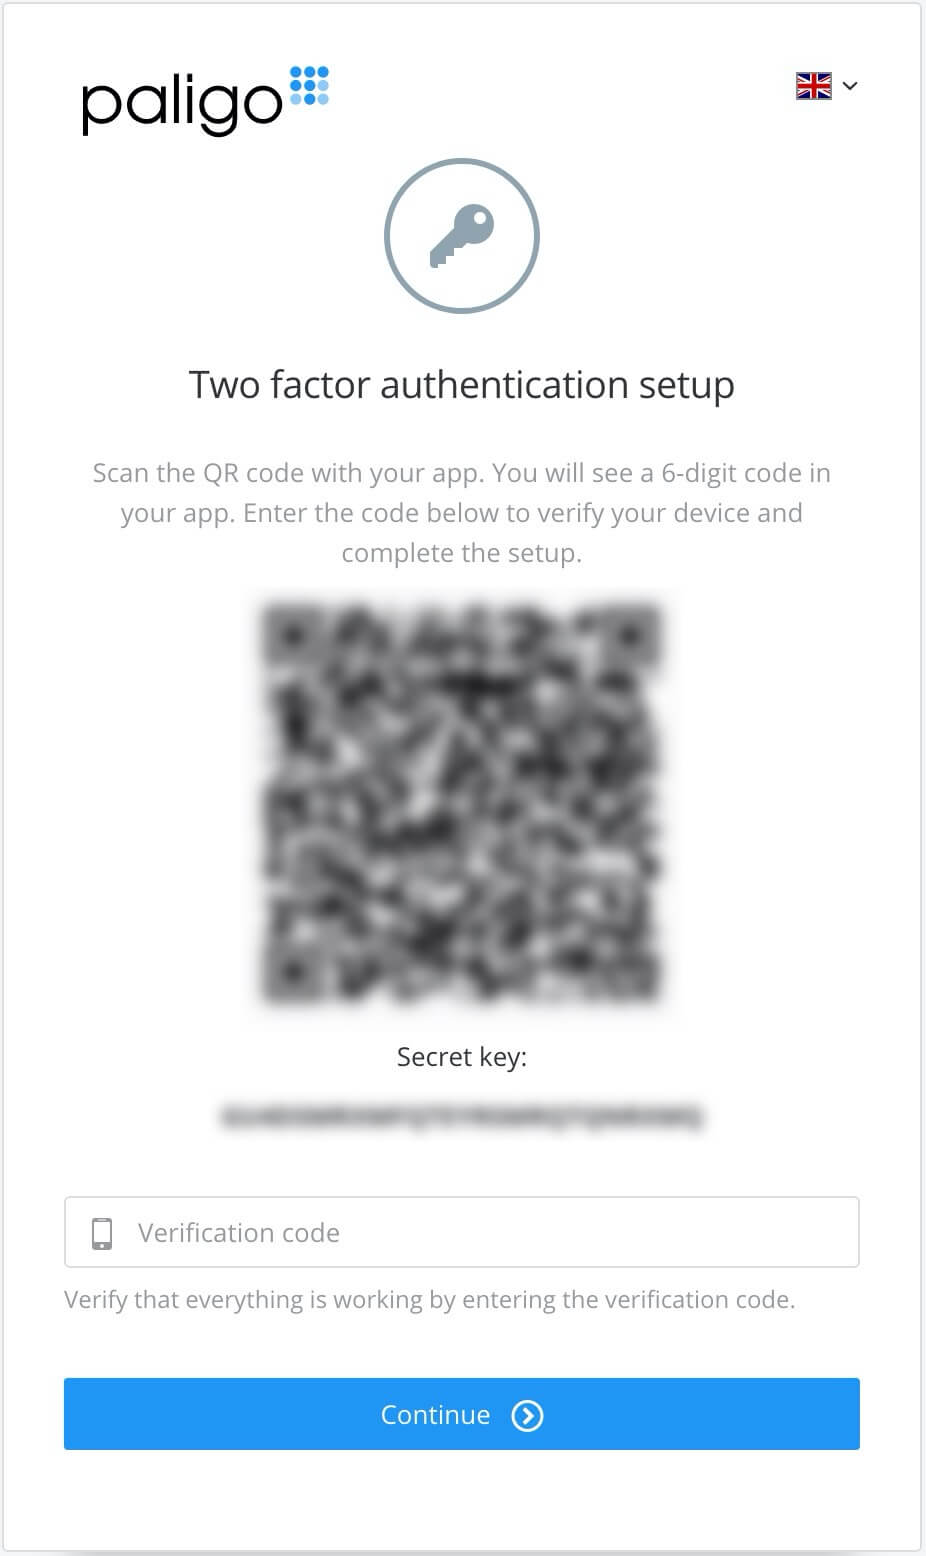 Two factor authentication 2FA authentication setup page showing QR code and secret key. Both blurred for security in image.